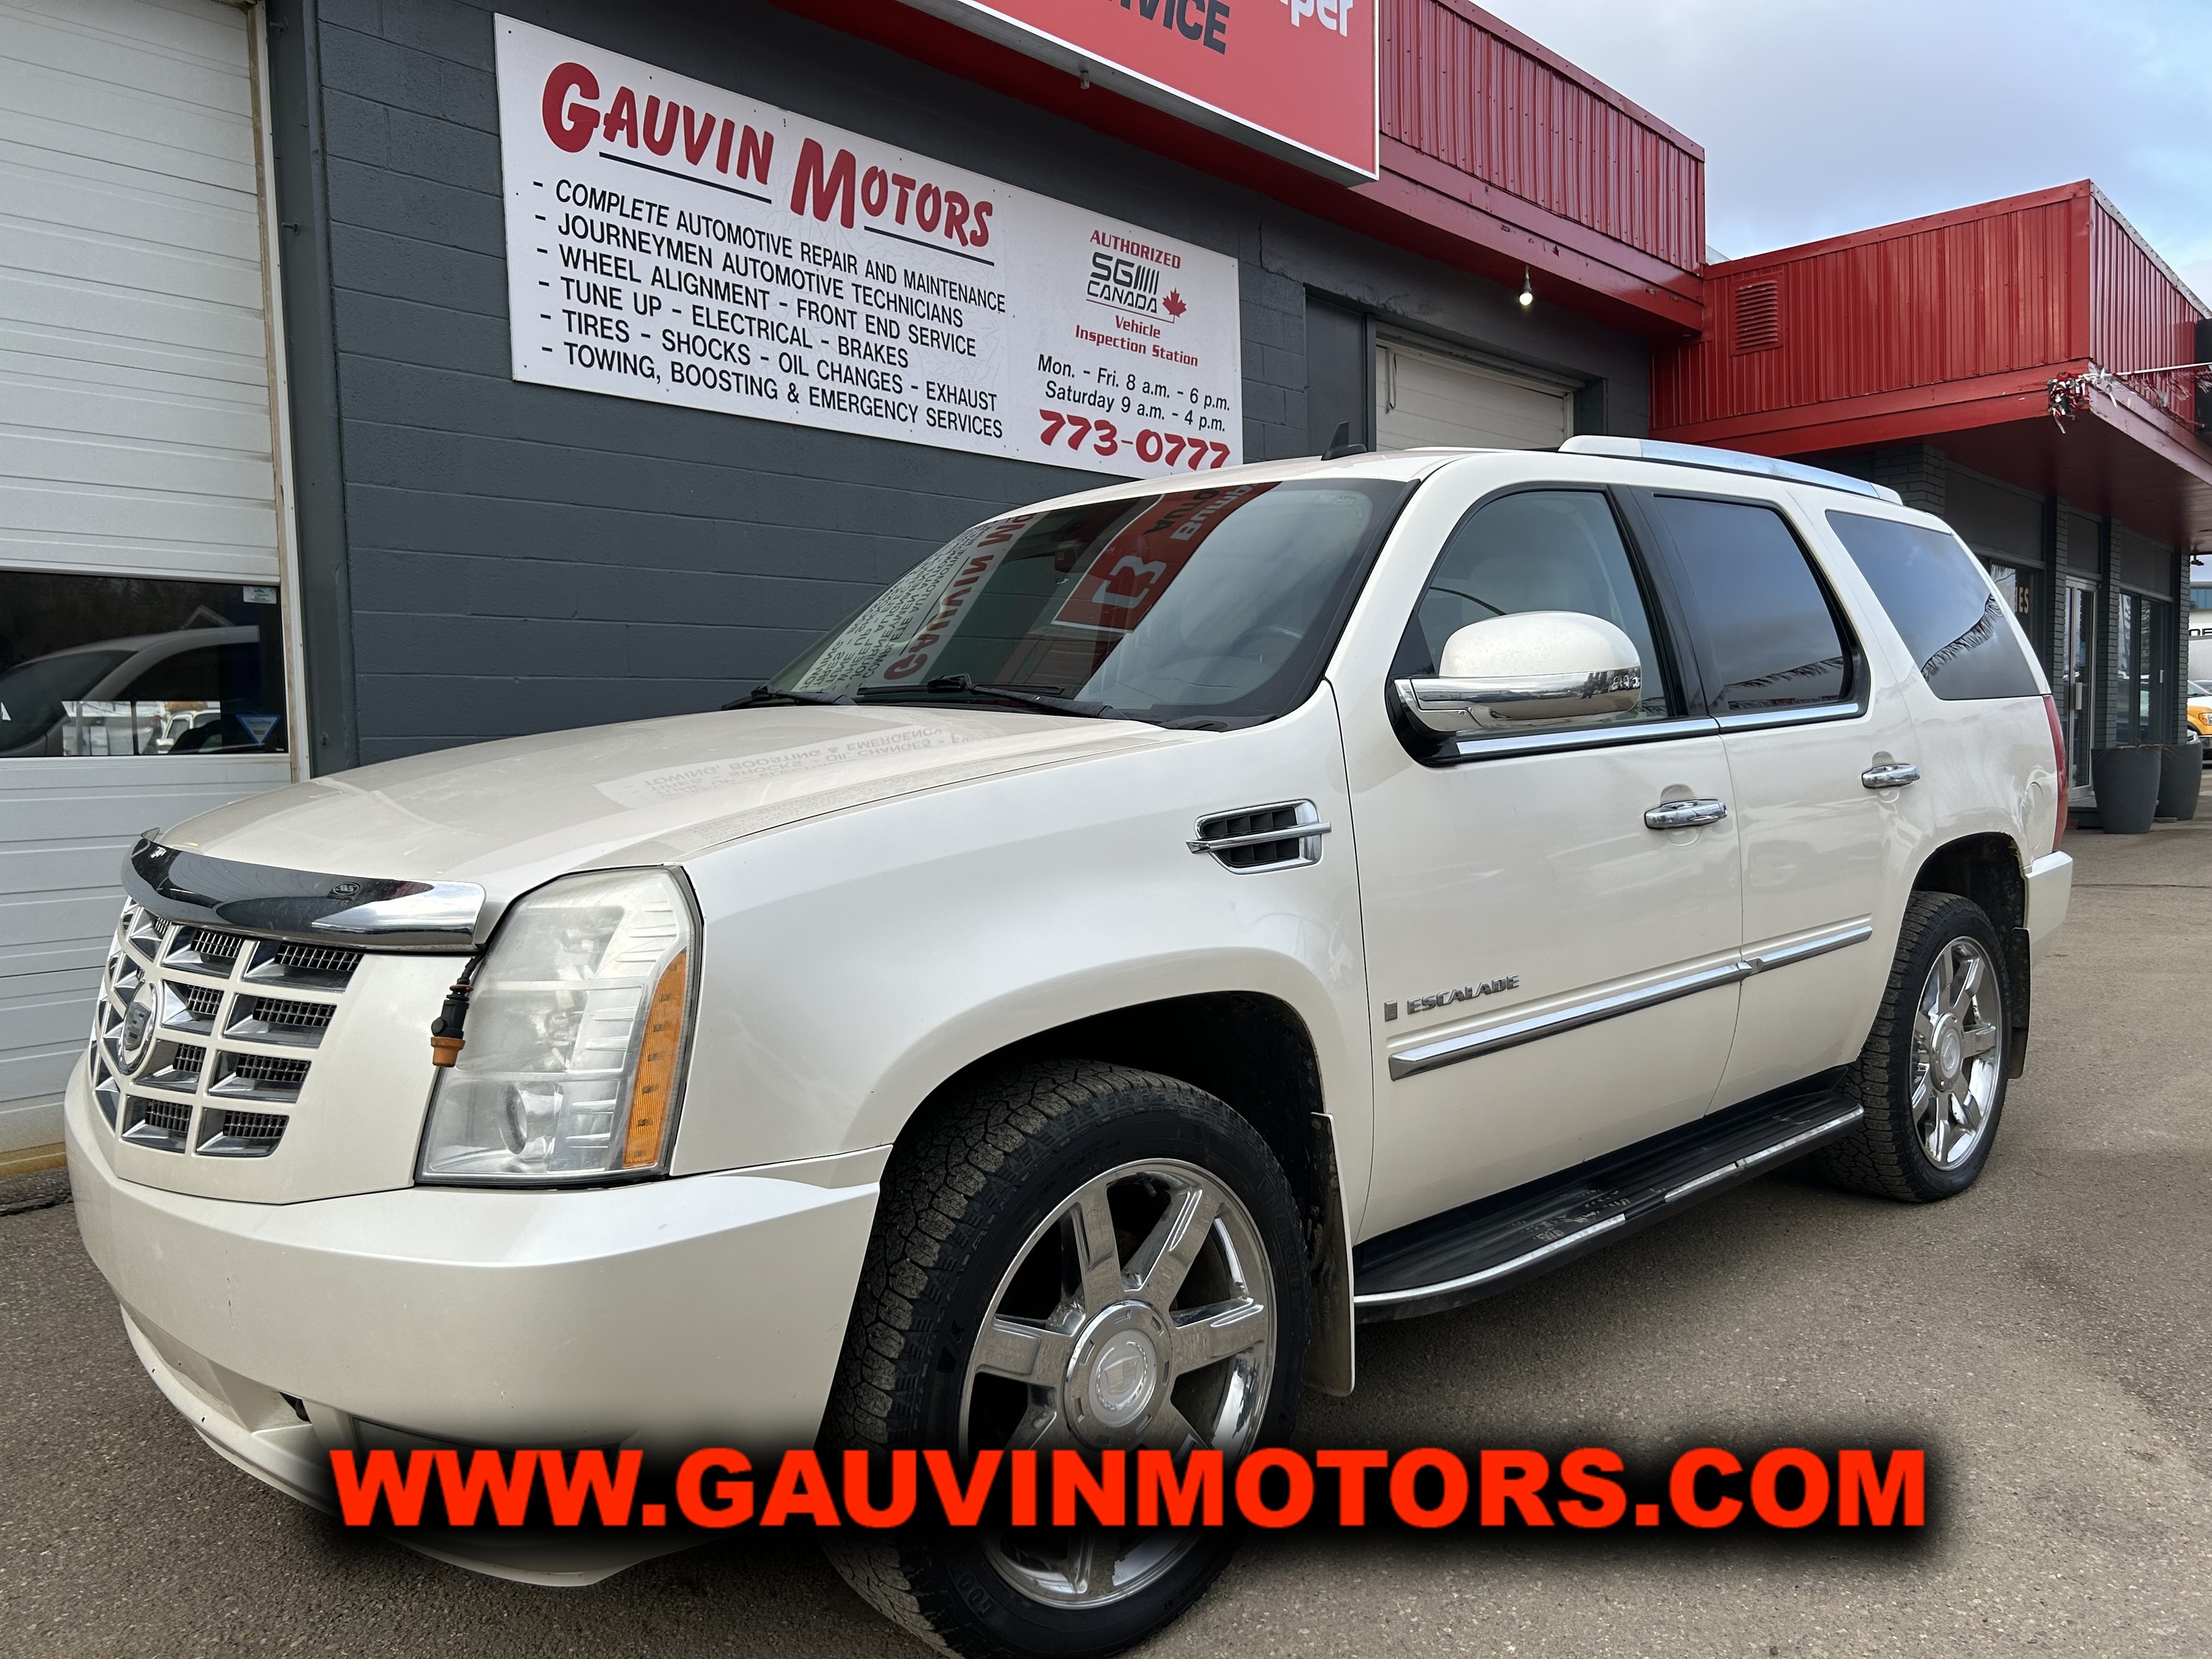 2008 Cadillac Escalade Fully Equipped 7 Passenger Cheapest One Around! 